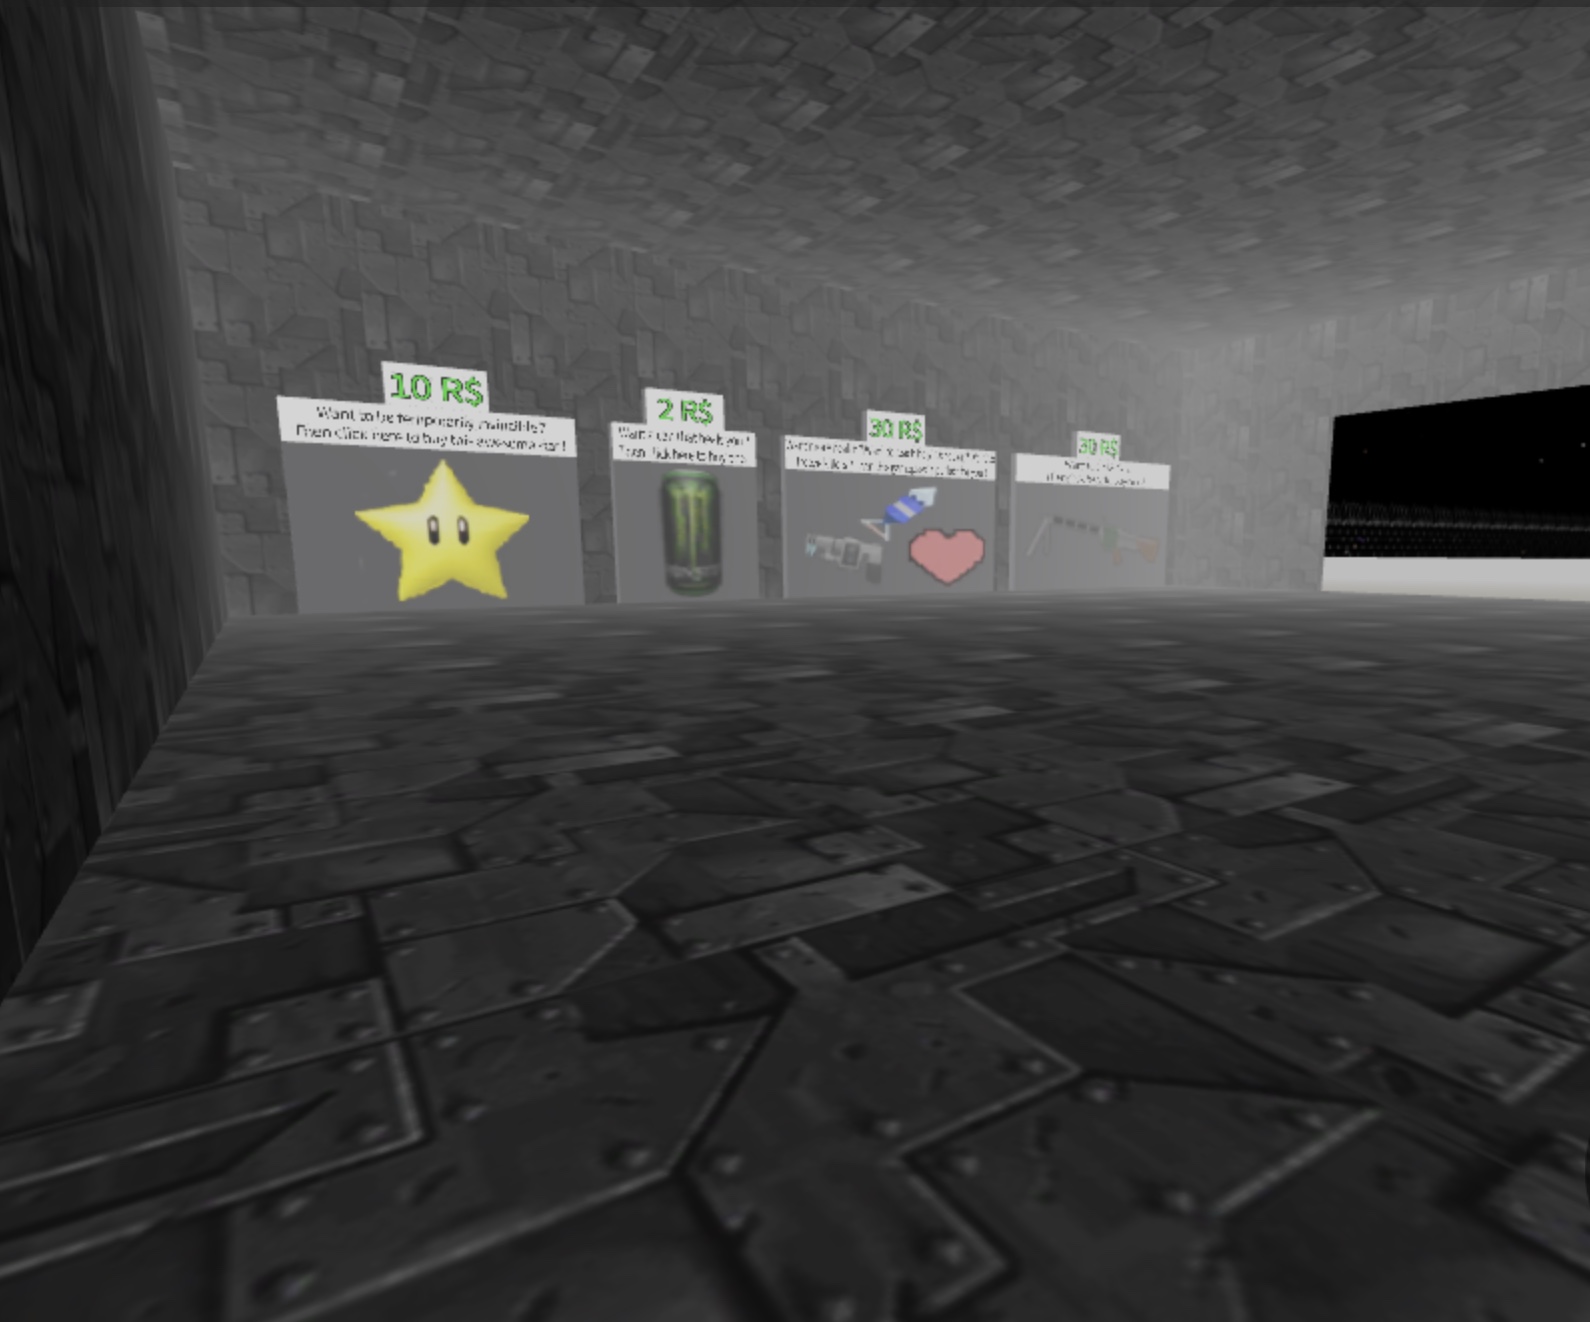 Gamepass Hangar Roblox Survive And Kill The Killers In Area 51 - roblox survive and kill the killers in area 51 execution room